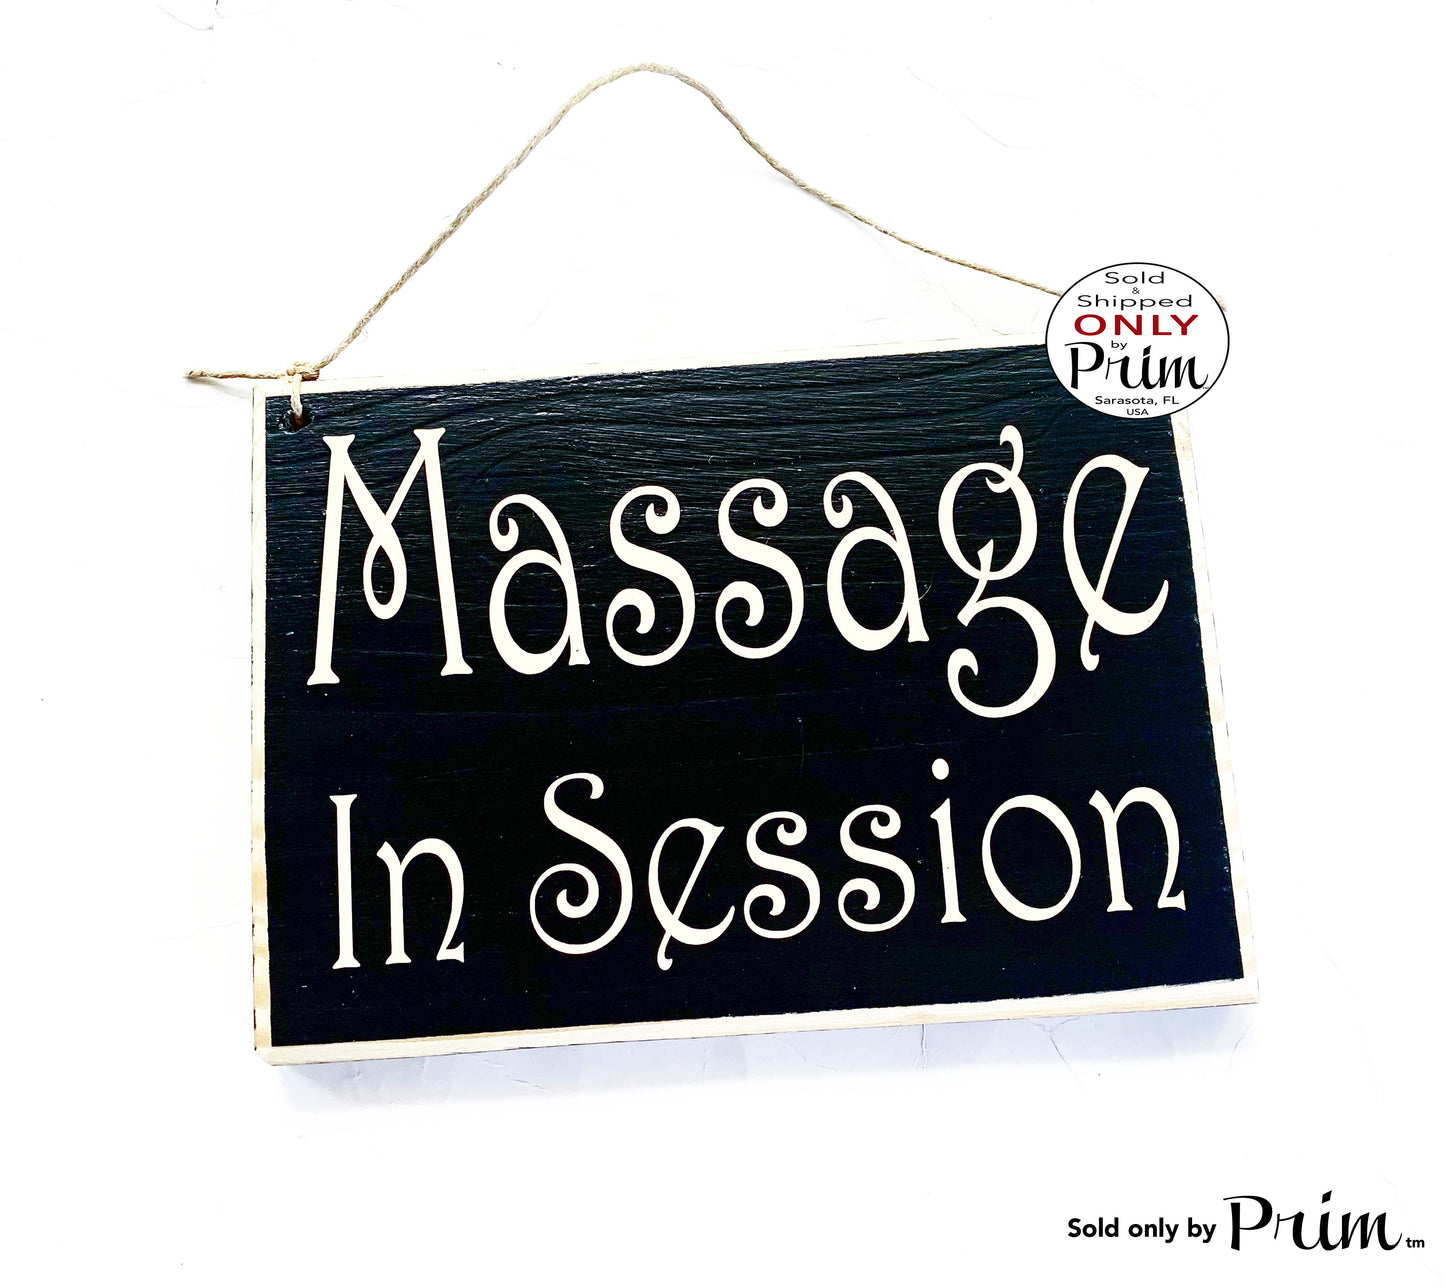 8x6 Massage In Session Custom Wood Sign | In Progress Please Do Not Disturb Spa Salon Office Relaxation Treatment Room Private Door Plaque Designs by Prim